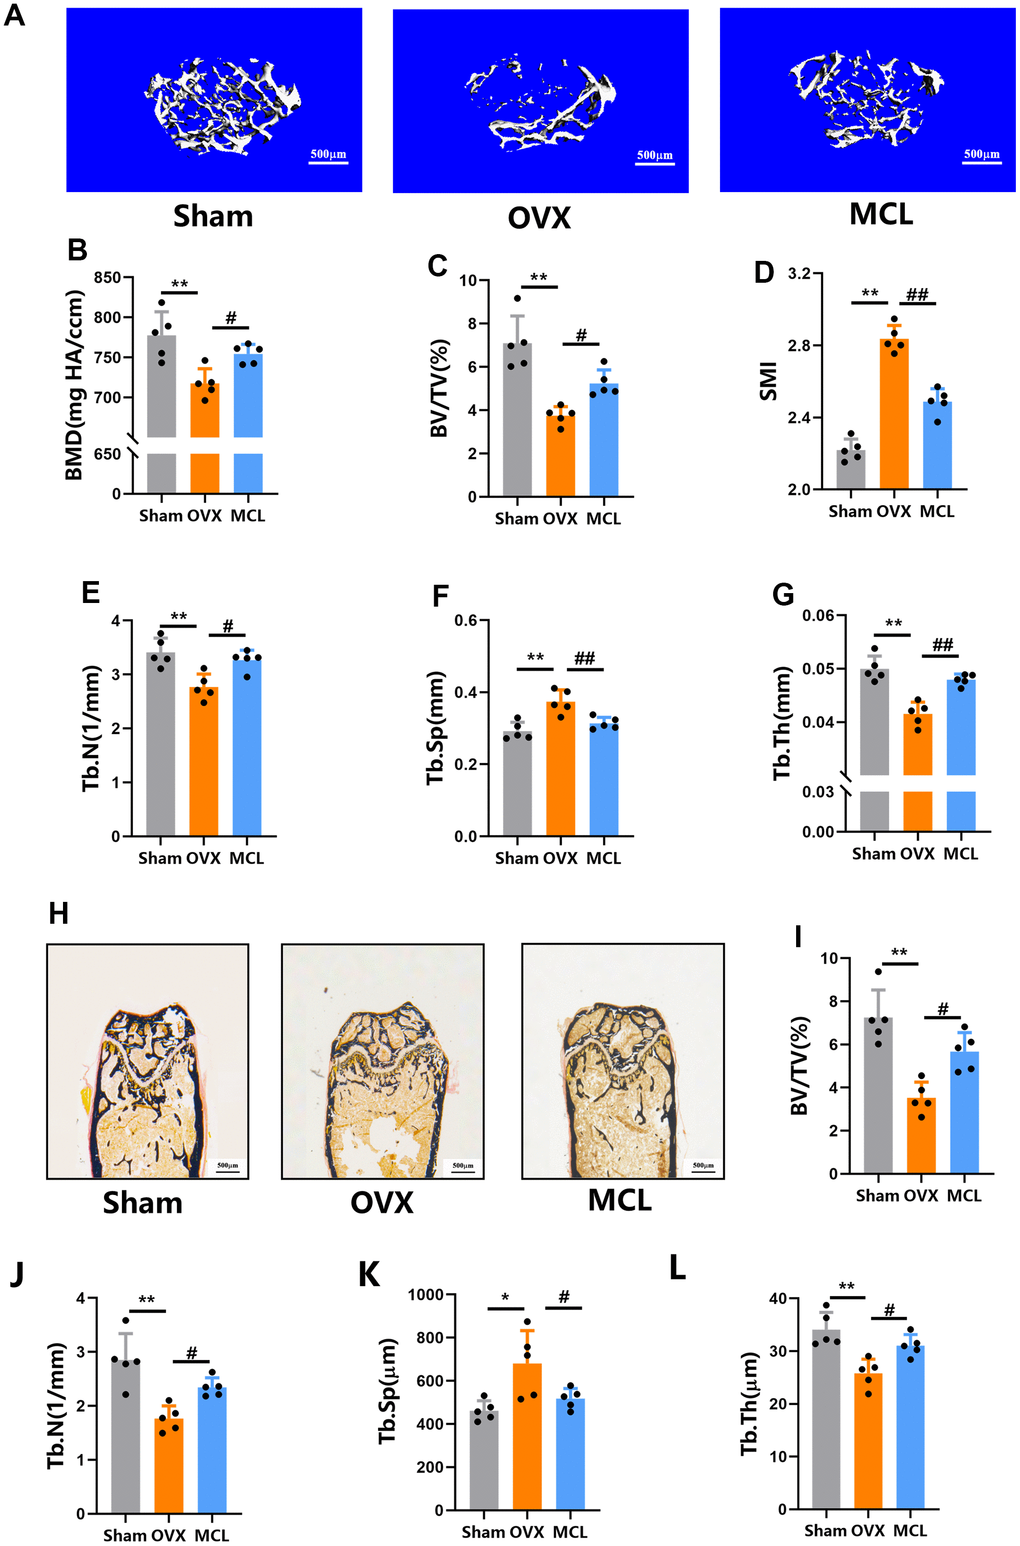 Micheliolide protected mice from OVX induced bone loss. Fifteen wild type female C57/BL6 mice aged 8 weeks were obtained and randomly split into three groups (n=5): Sham group (with Sham surgery and following with vehicle treatment), OVX group (with OVX surgery following with vehicle treatment), MCL group (with OVX operation following with Micheliolide treatment (30 mg/kg/day)). (A) Representative 3D micro-CT images of proximal femur. Scale bar = 500 μm. (B–G) Micro-CT values of BMD (mg HA/ccm), BV/TV (%), SMI, Tb.N (1/mm), Tb.Th (mm), and Tb.Sp (mm) were analyzed using the built-in software. (H) Representative Von Kossa staining of the histomorphological sections from each indicated group. (I–L) BV/TV, Tb.Th, Tb.N, and Tb.Sp of the Von Kossa staining sections from each group. All data: mean ± SD, n=5, *p 